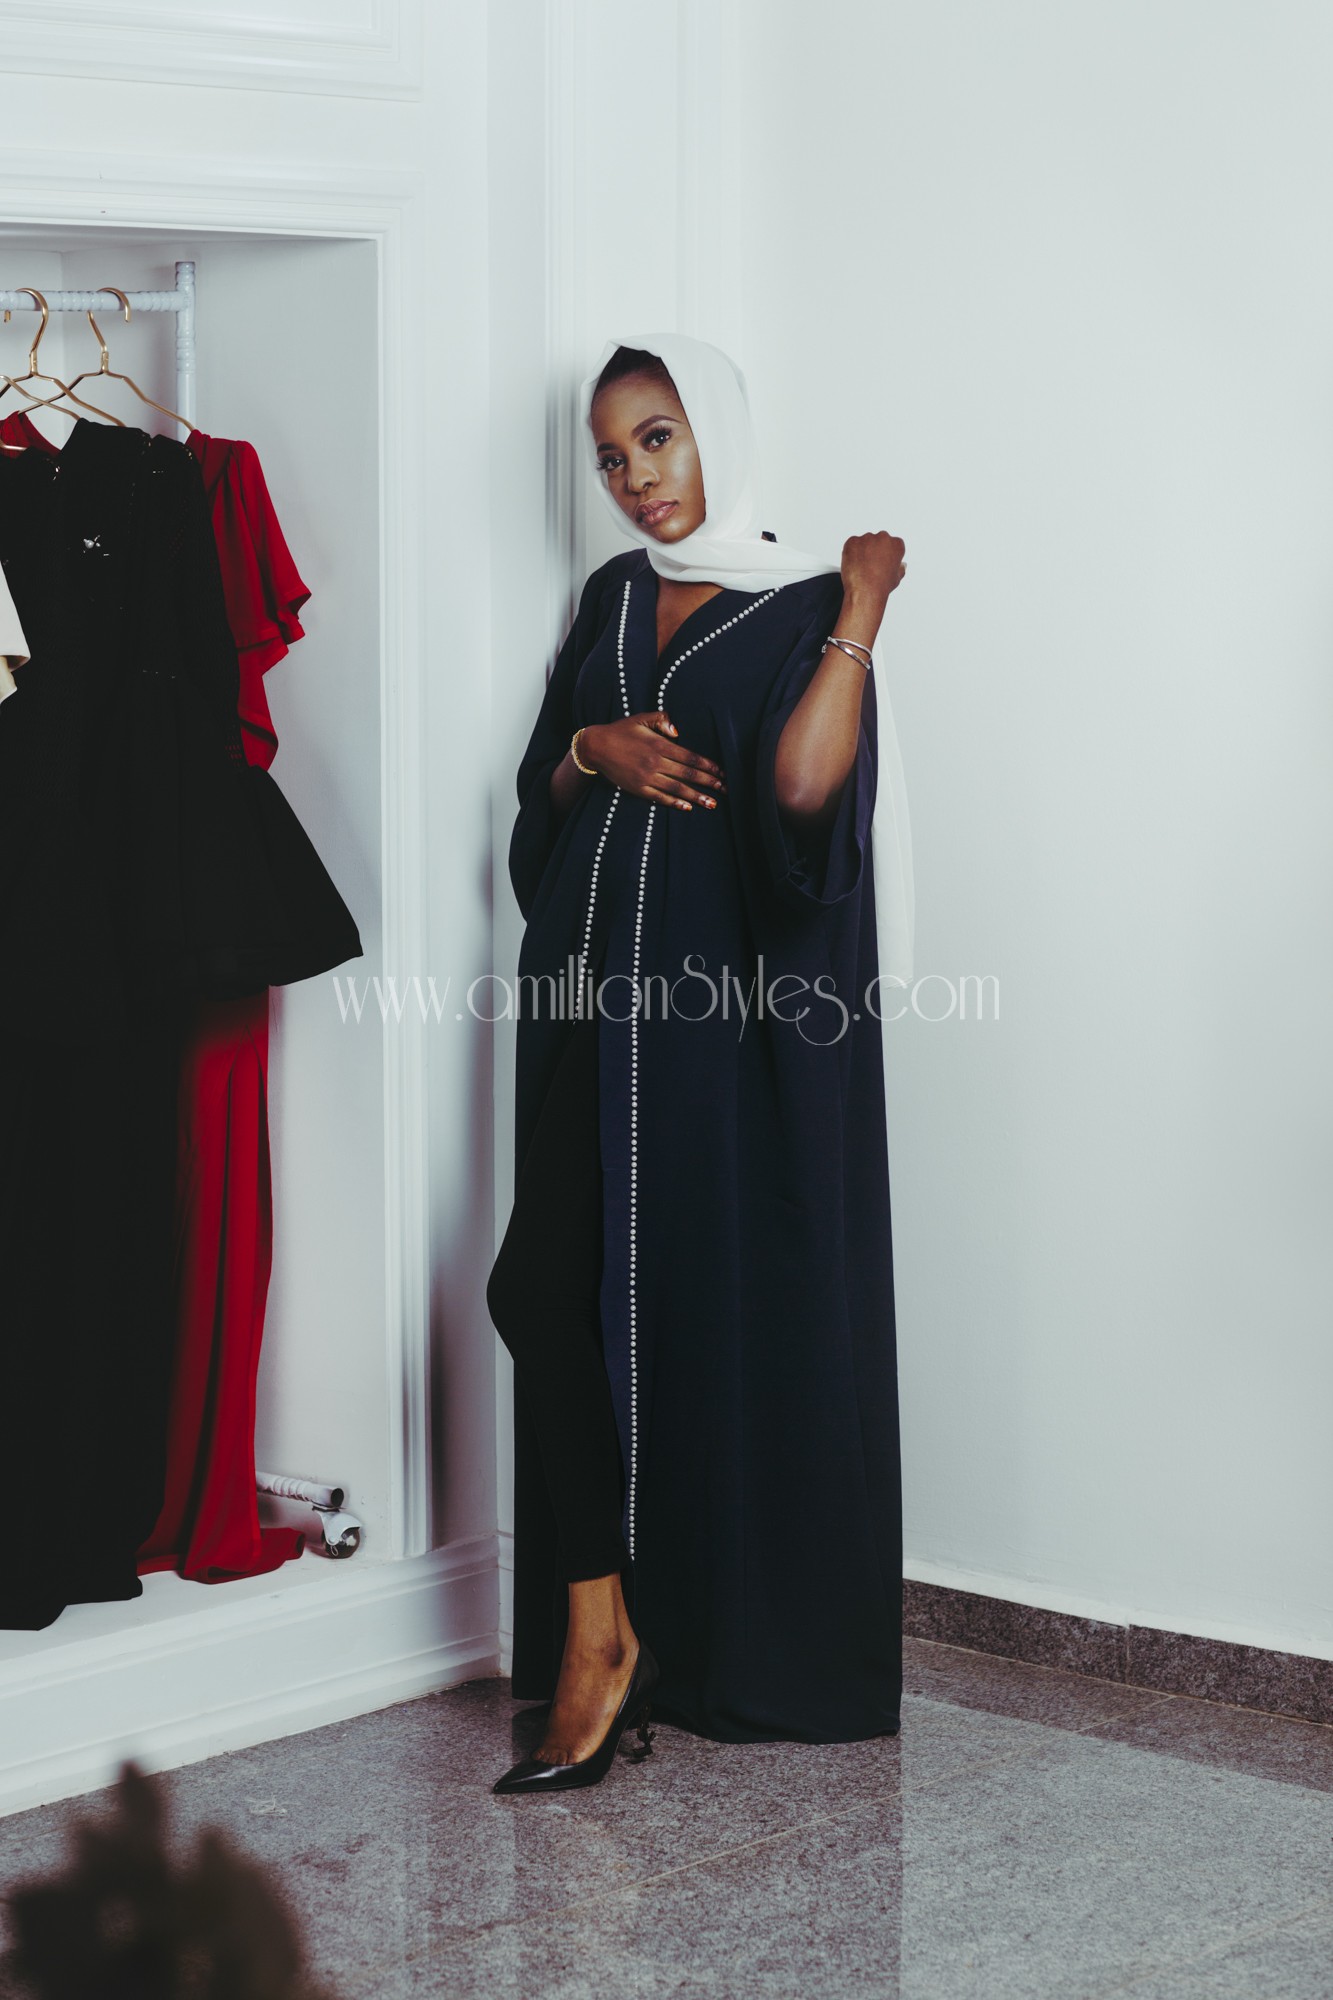 This Collection By Amnas Is Perfect For Ramadan